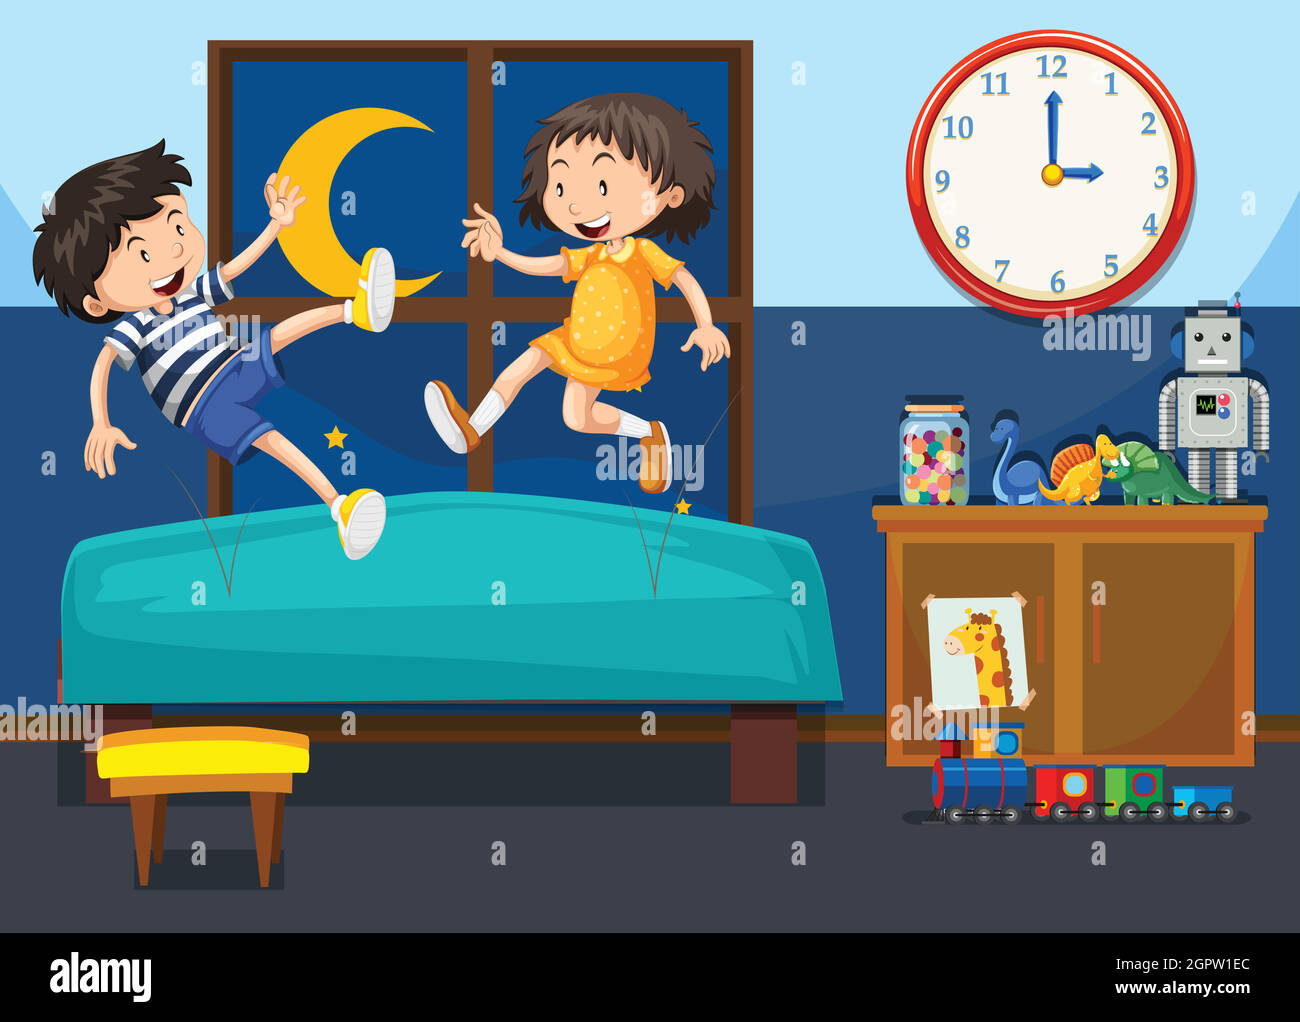 Boy and girl playing on the bed Stock Vector